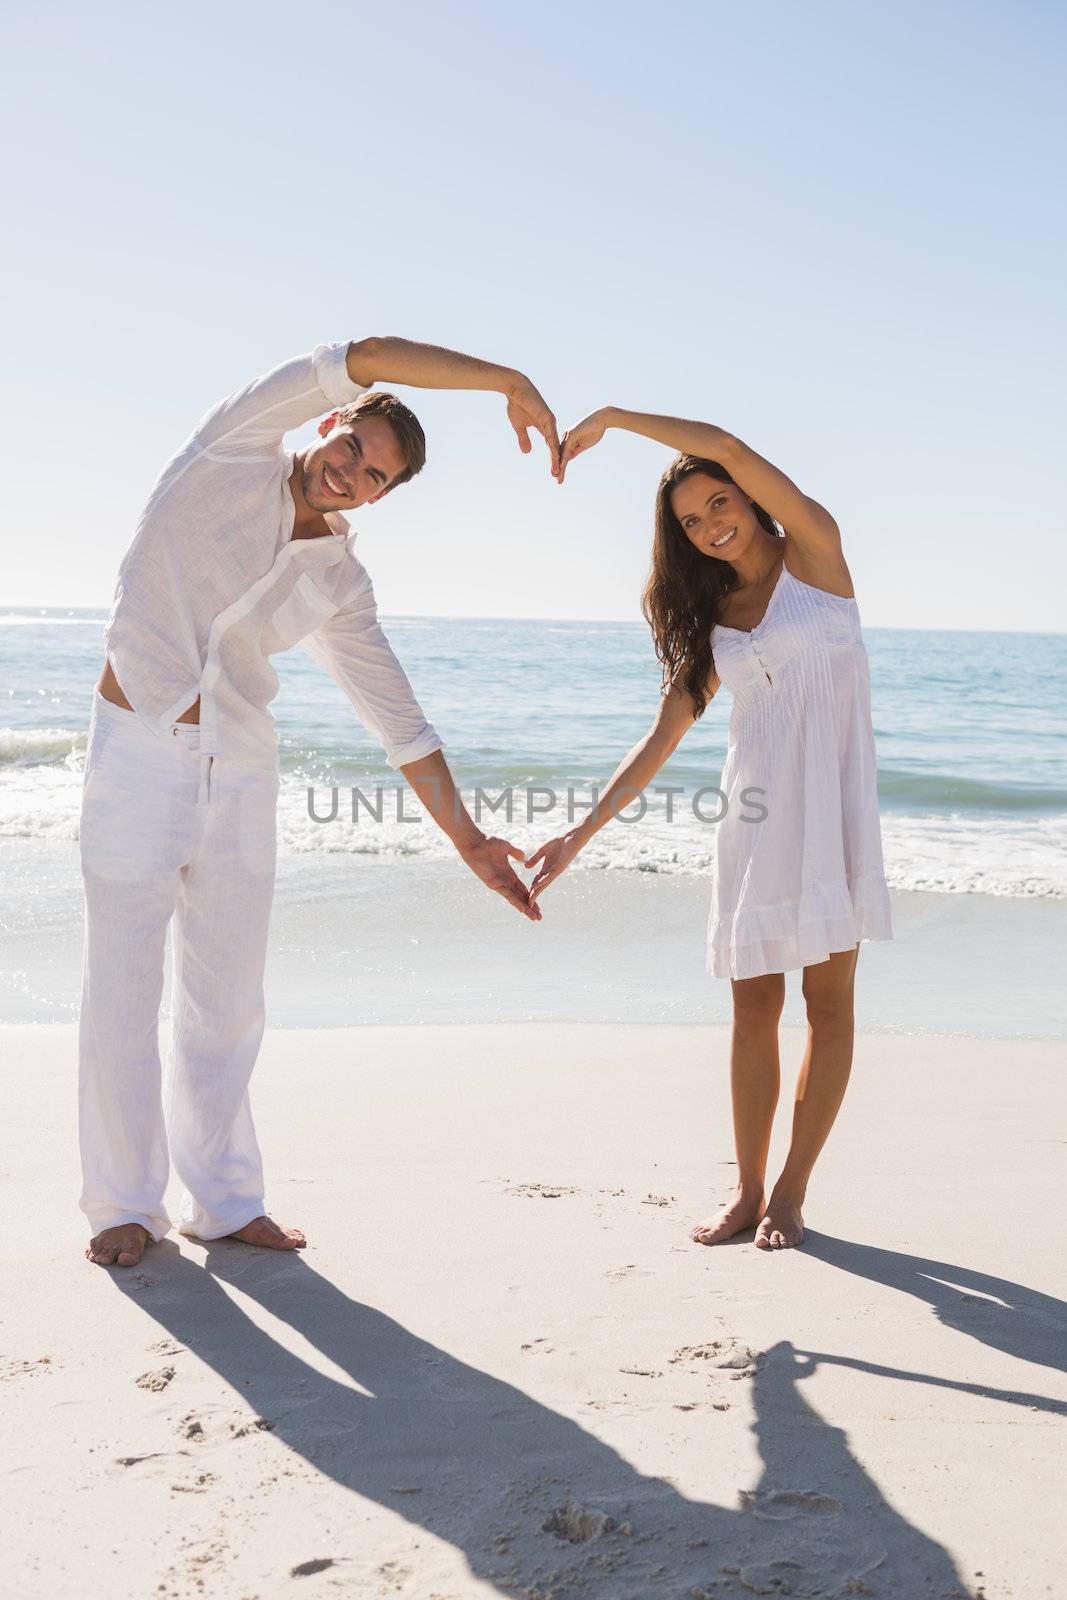 Romantic couple forming heart shape with arms by Wavebreakmedia